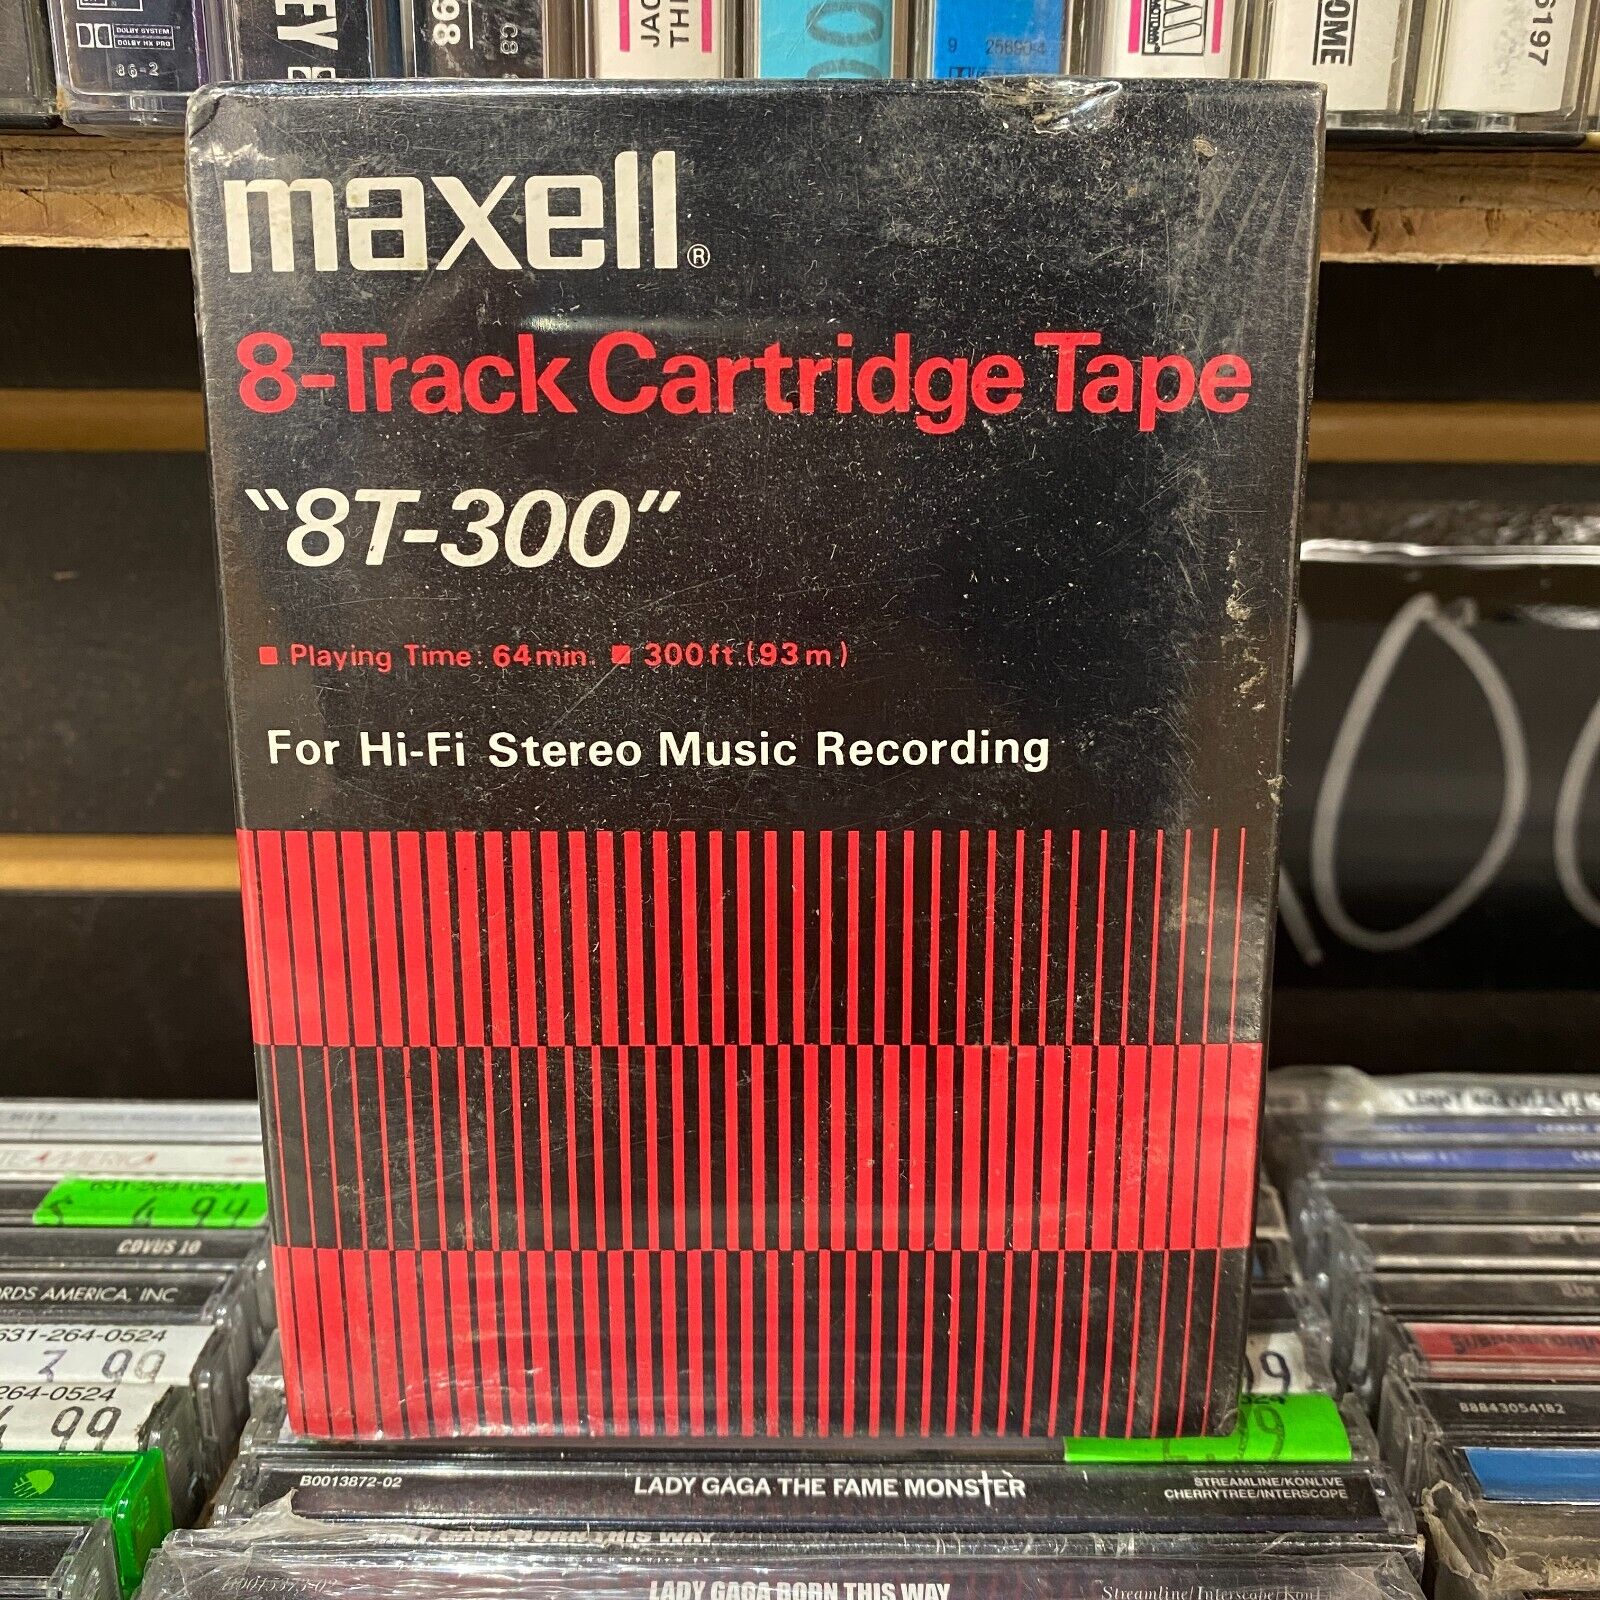 Maxell 8-track Cartridge Tape 8t-300 [8 Track Tape, New] Sealed!!! Recordable